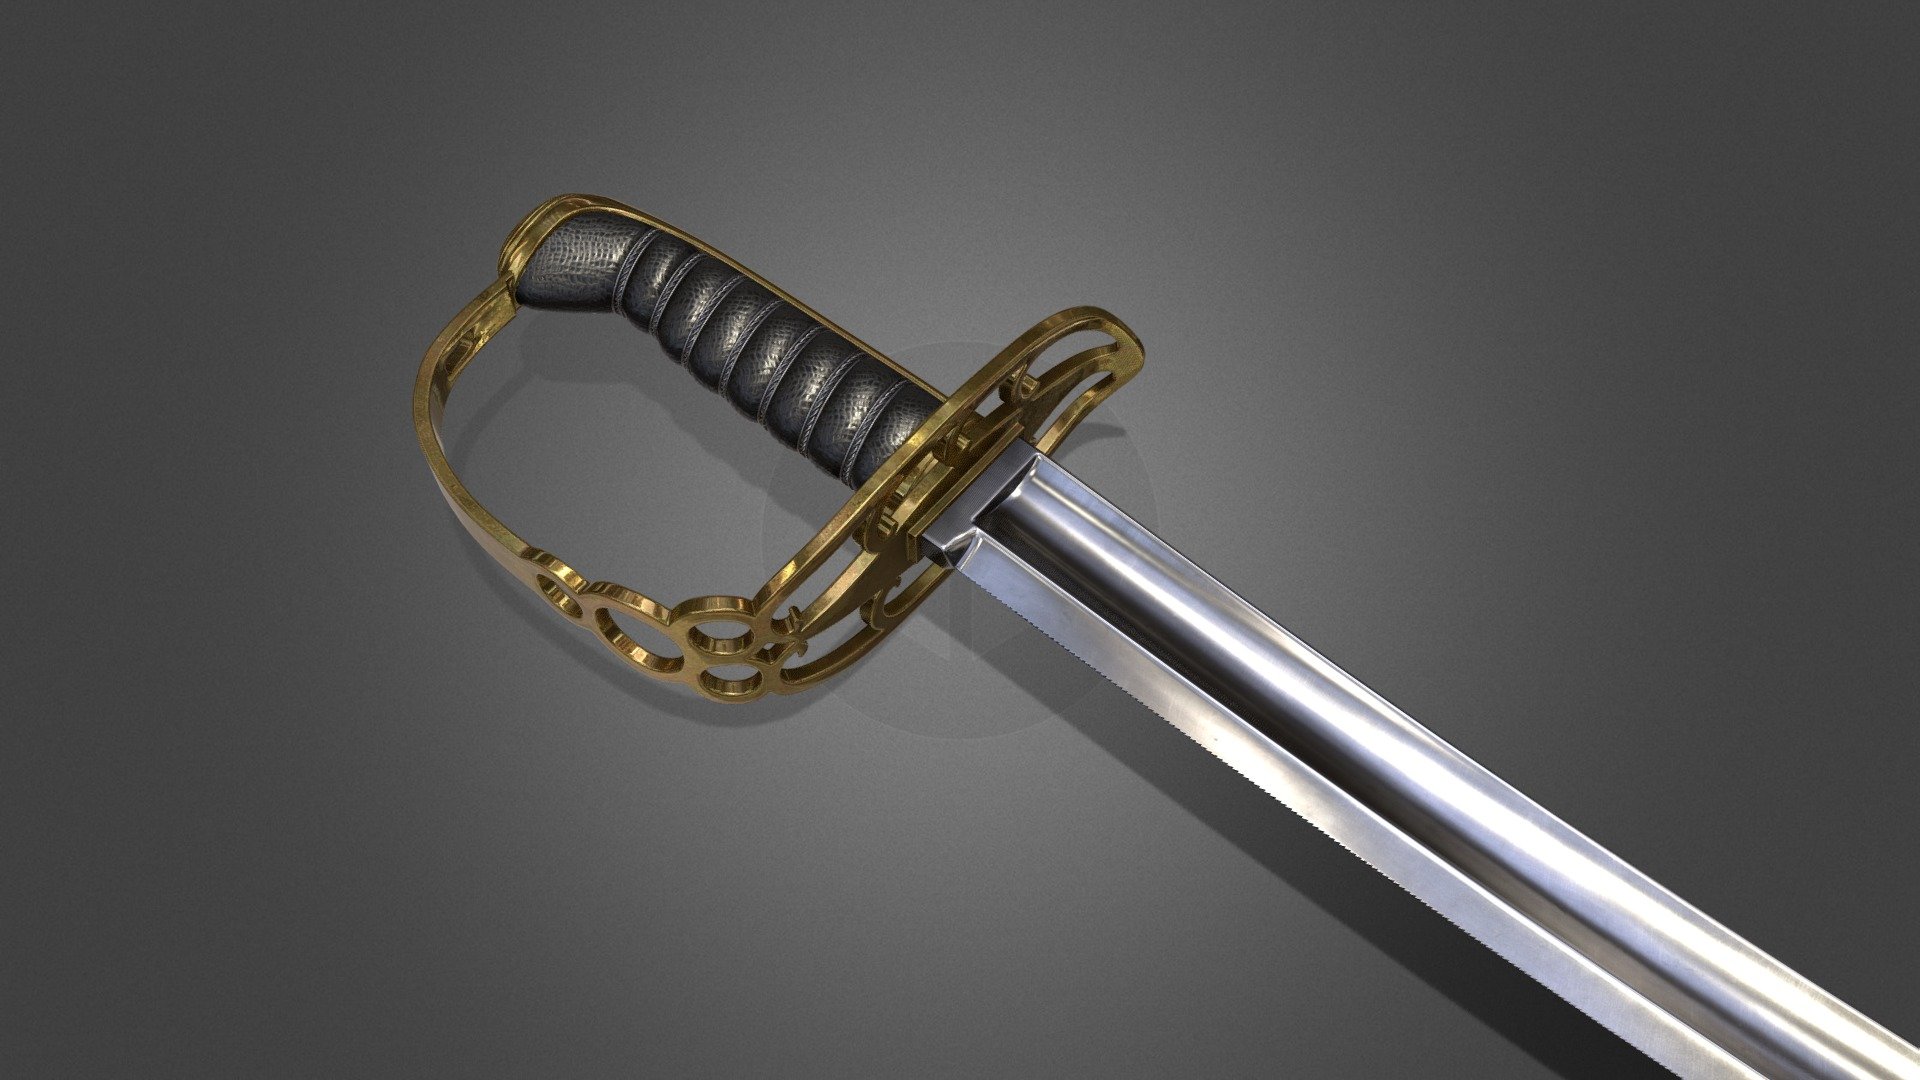 Model of the iconic slot hilt sabre. With 80cm length, the blade features a fearsome broad fuller and very aggressive distal taper(reduction in thickness). It tapers from 8mm at the base to half of that in less than 1/3 to the tip. The top 1/3 area are less than 2mm, giving the sword excellent handling despite its width. 

Such officer's sword would usually have its grip wrapped in fish skin and metal wires. A metal sheet is also present to cover the back of the grip for durability, though it can sometimes be slippery. 

Traditionally, the guard was cast in brass, hence the gold look. Brass is soft, so people also ordered steel guards that gilded in brass to match the regulation 3d model